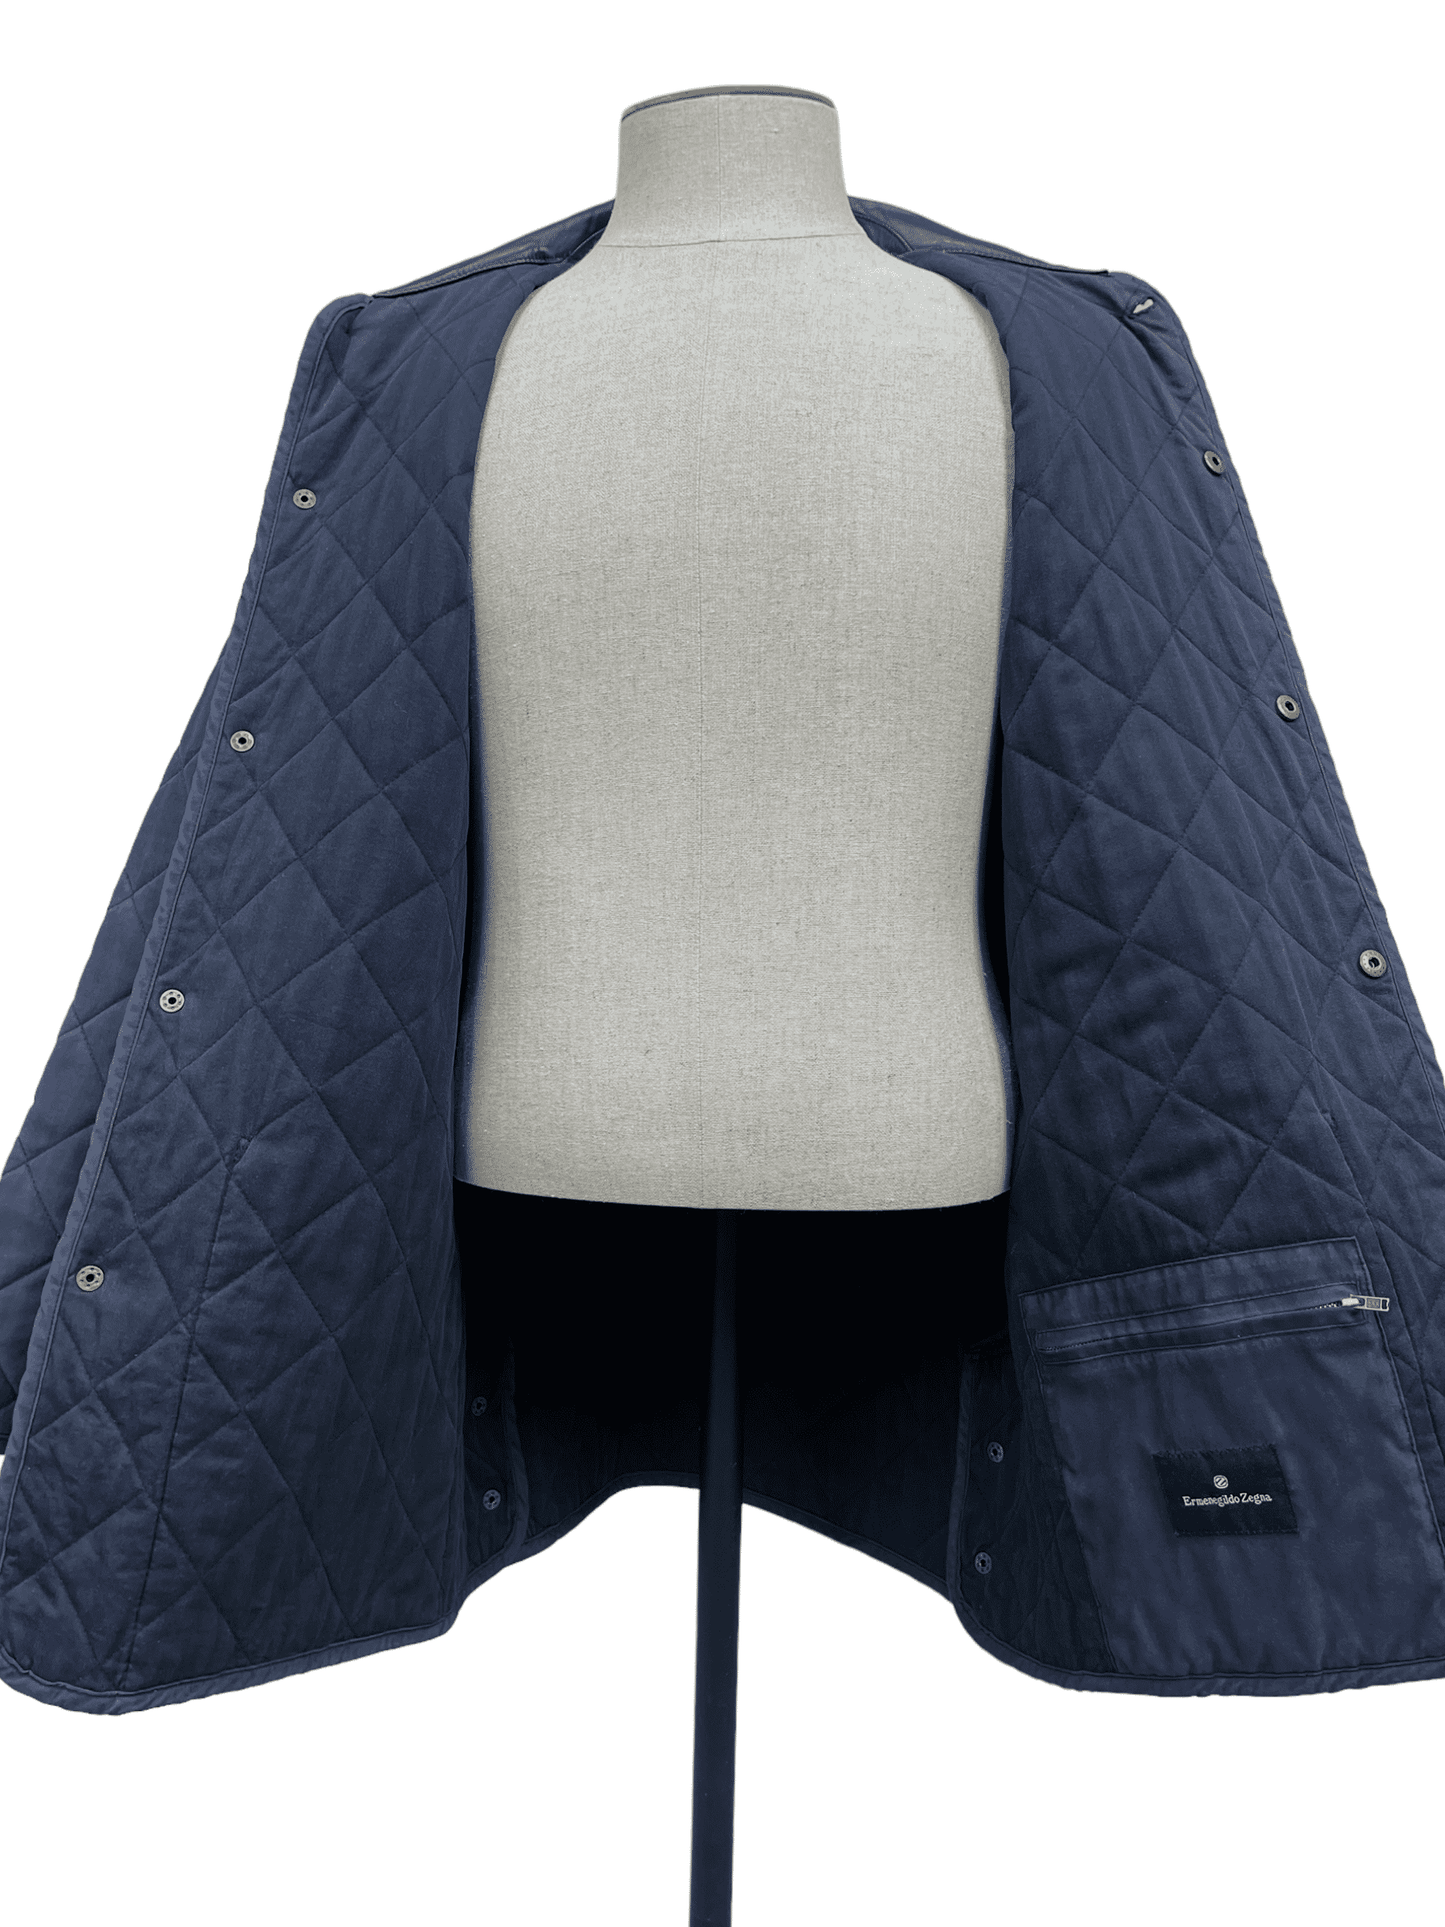 Ermenegildo Zegna Blue Quilted Jacket  - Genuine Design Luxury Consignment for Men. New & Pre-Owned Clothing, Shoes, & Accessories. Calgary, Canada